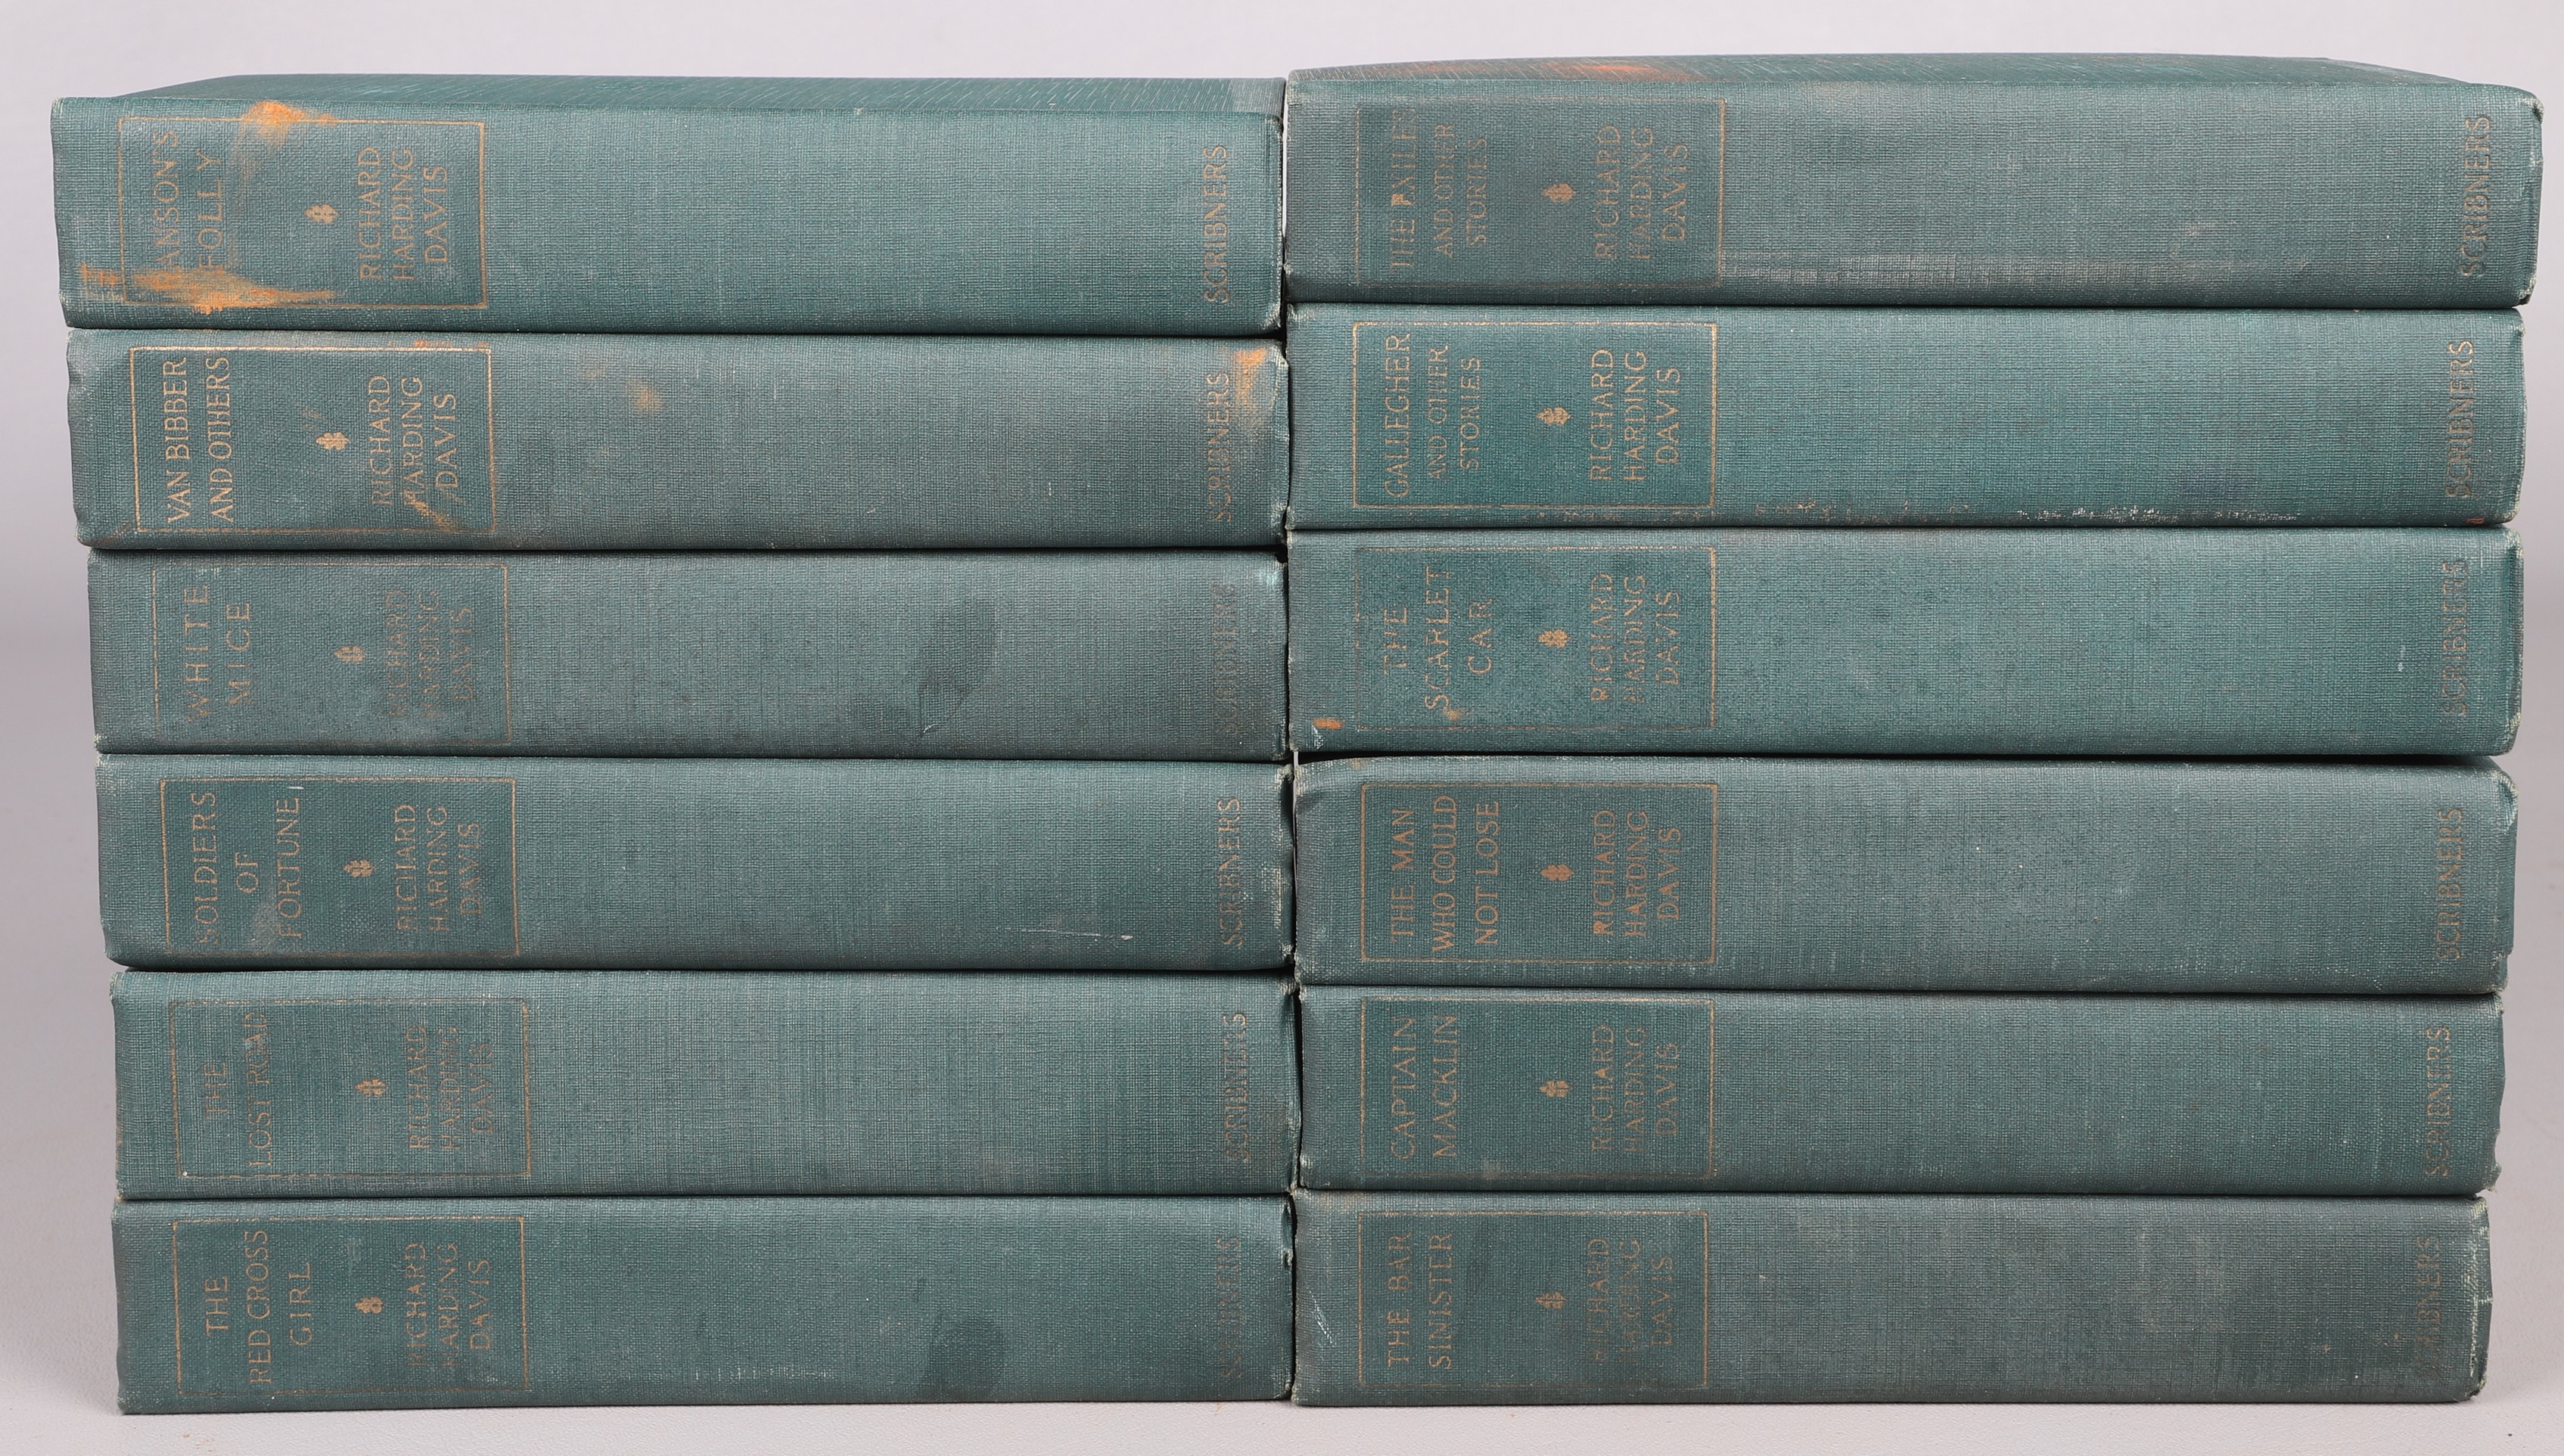 A 12 volume set of The Novels and 27a770